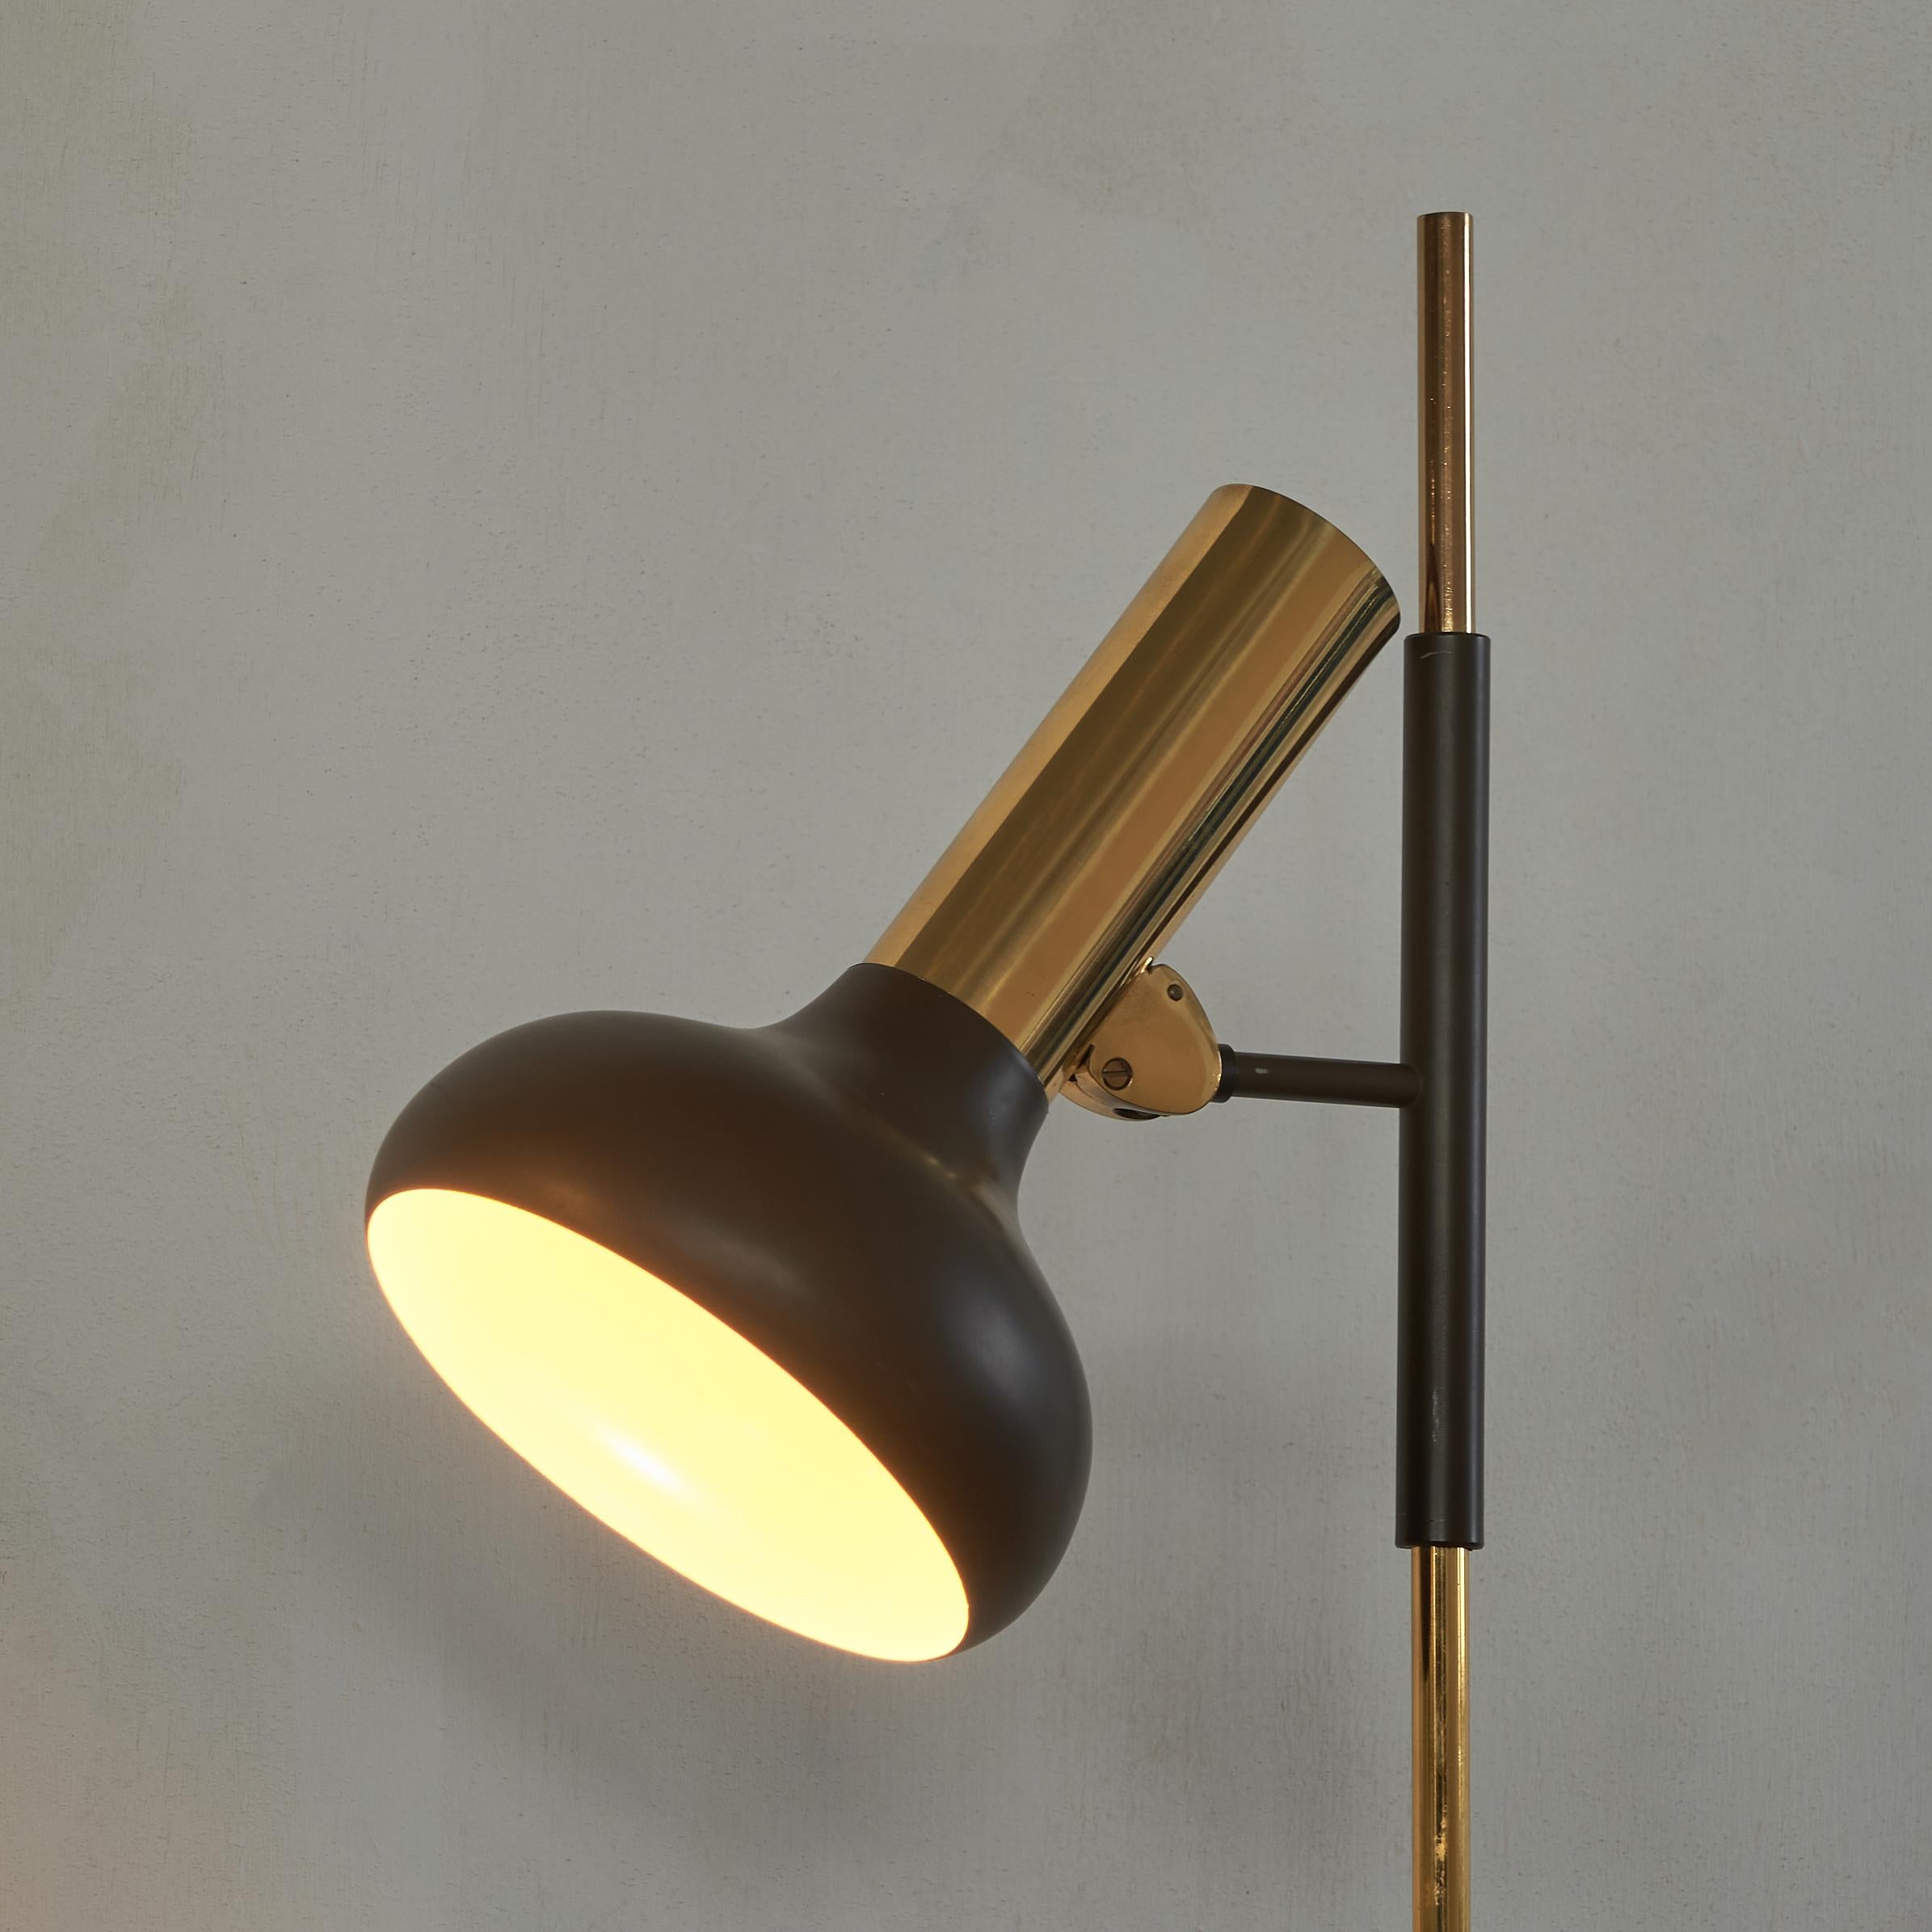 Beautiful floor lamp by the Belgian maker S.A. Boulanger from Brussels. A simple design, but with a very stylish look at the same time. Rich appearance due to the brass finish. The brass is still very beautiful and has little patina. The hood and